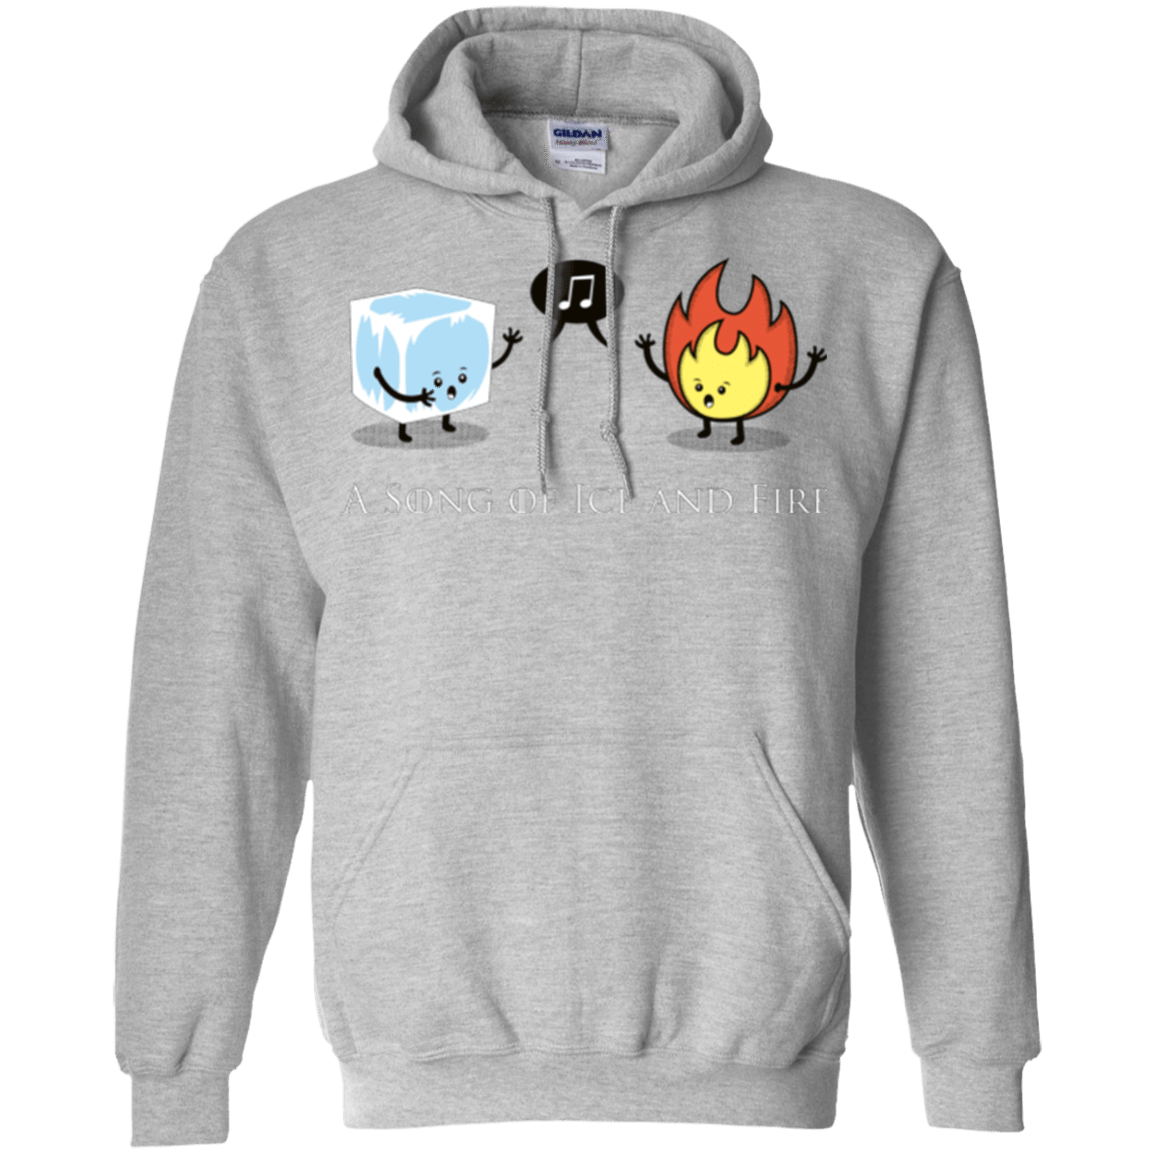 Sweatshirts Sport Grey / Small A Song of Ice and Fire Pullover Hoodie